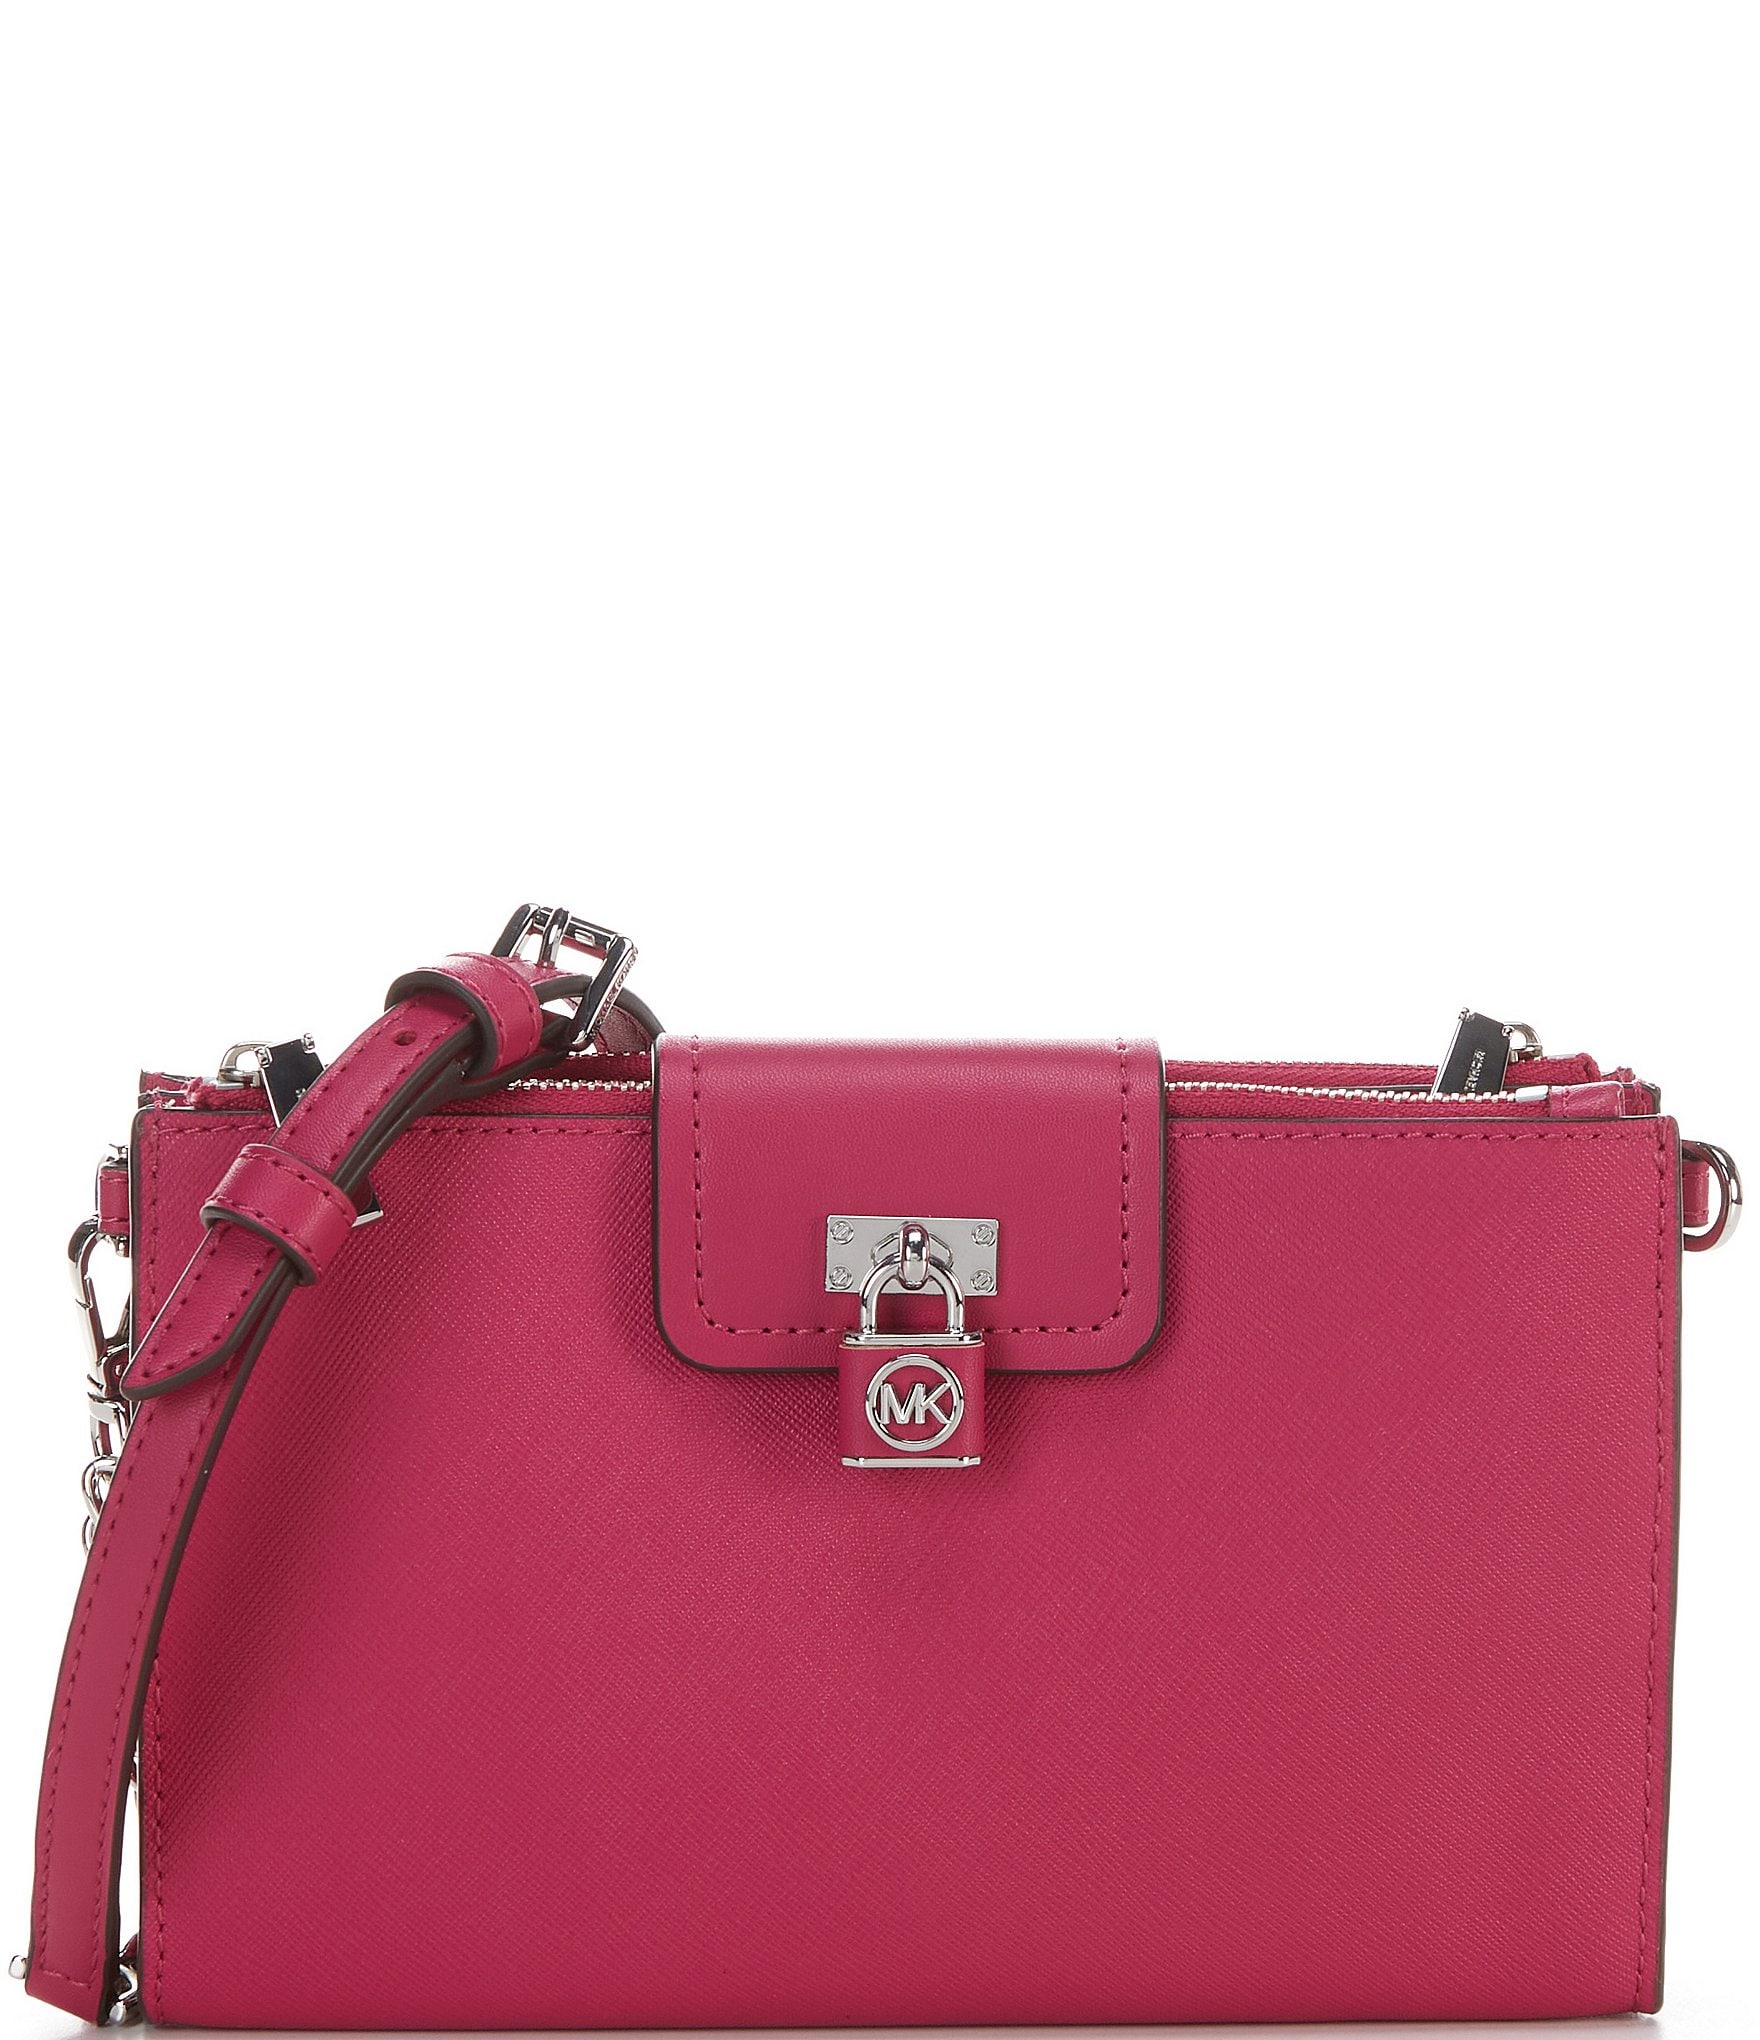 Michael Kors Ruby Large Saffiano Leather Tote Bag